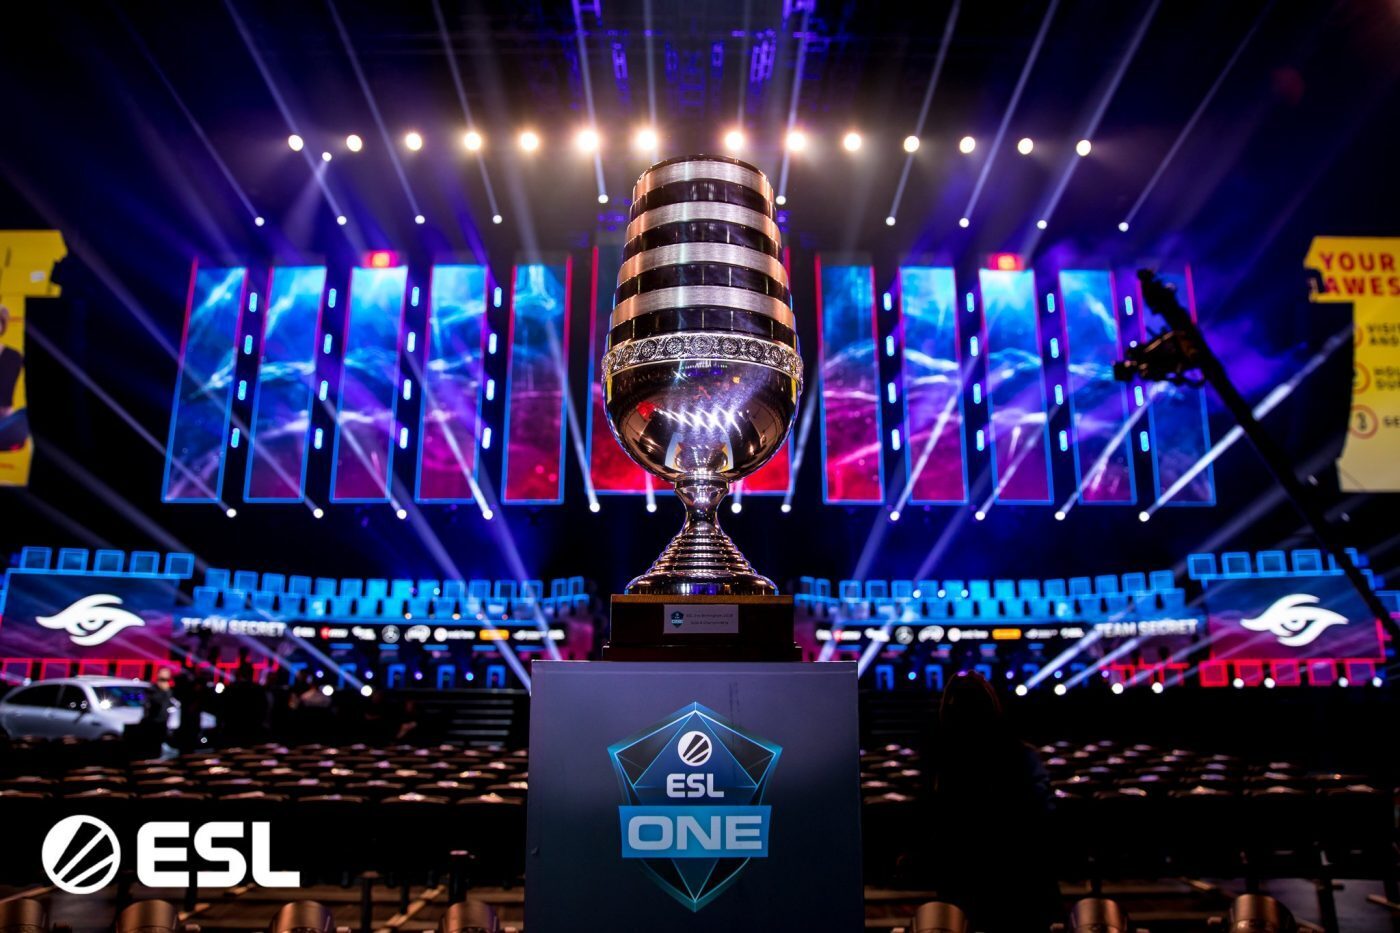 ESL One Birmingham 2019 delighted fans with a neck-and-neck, five-game grand final. (Photo courtesy of ESL)